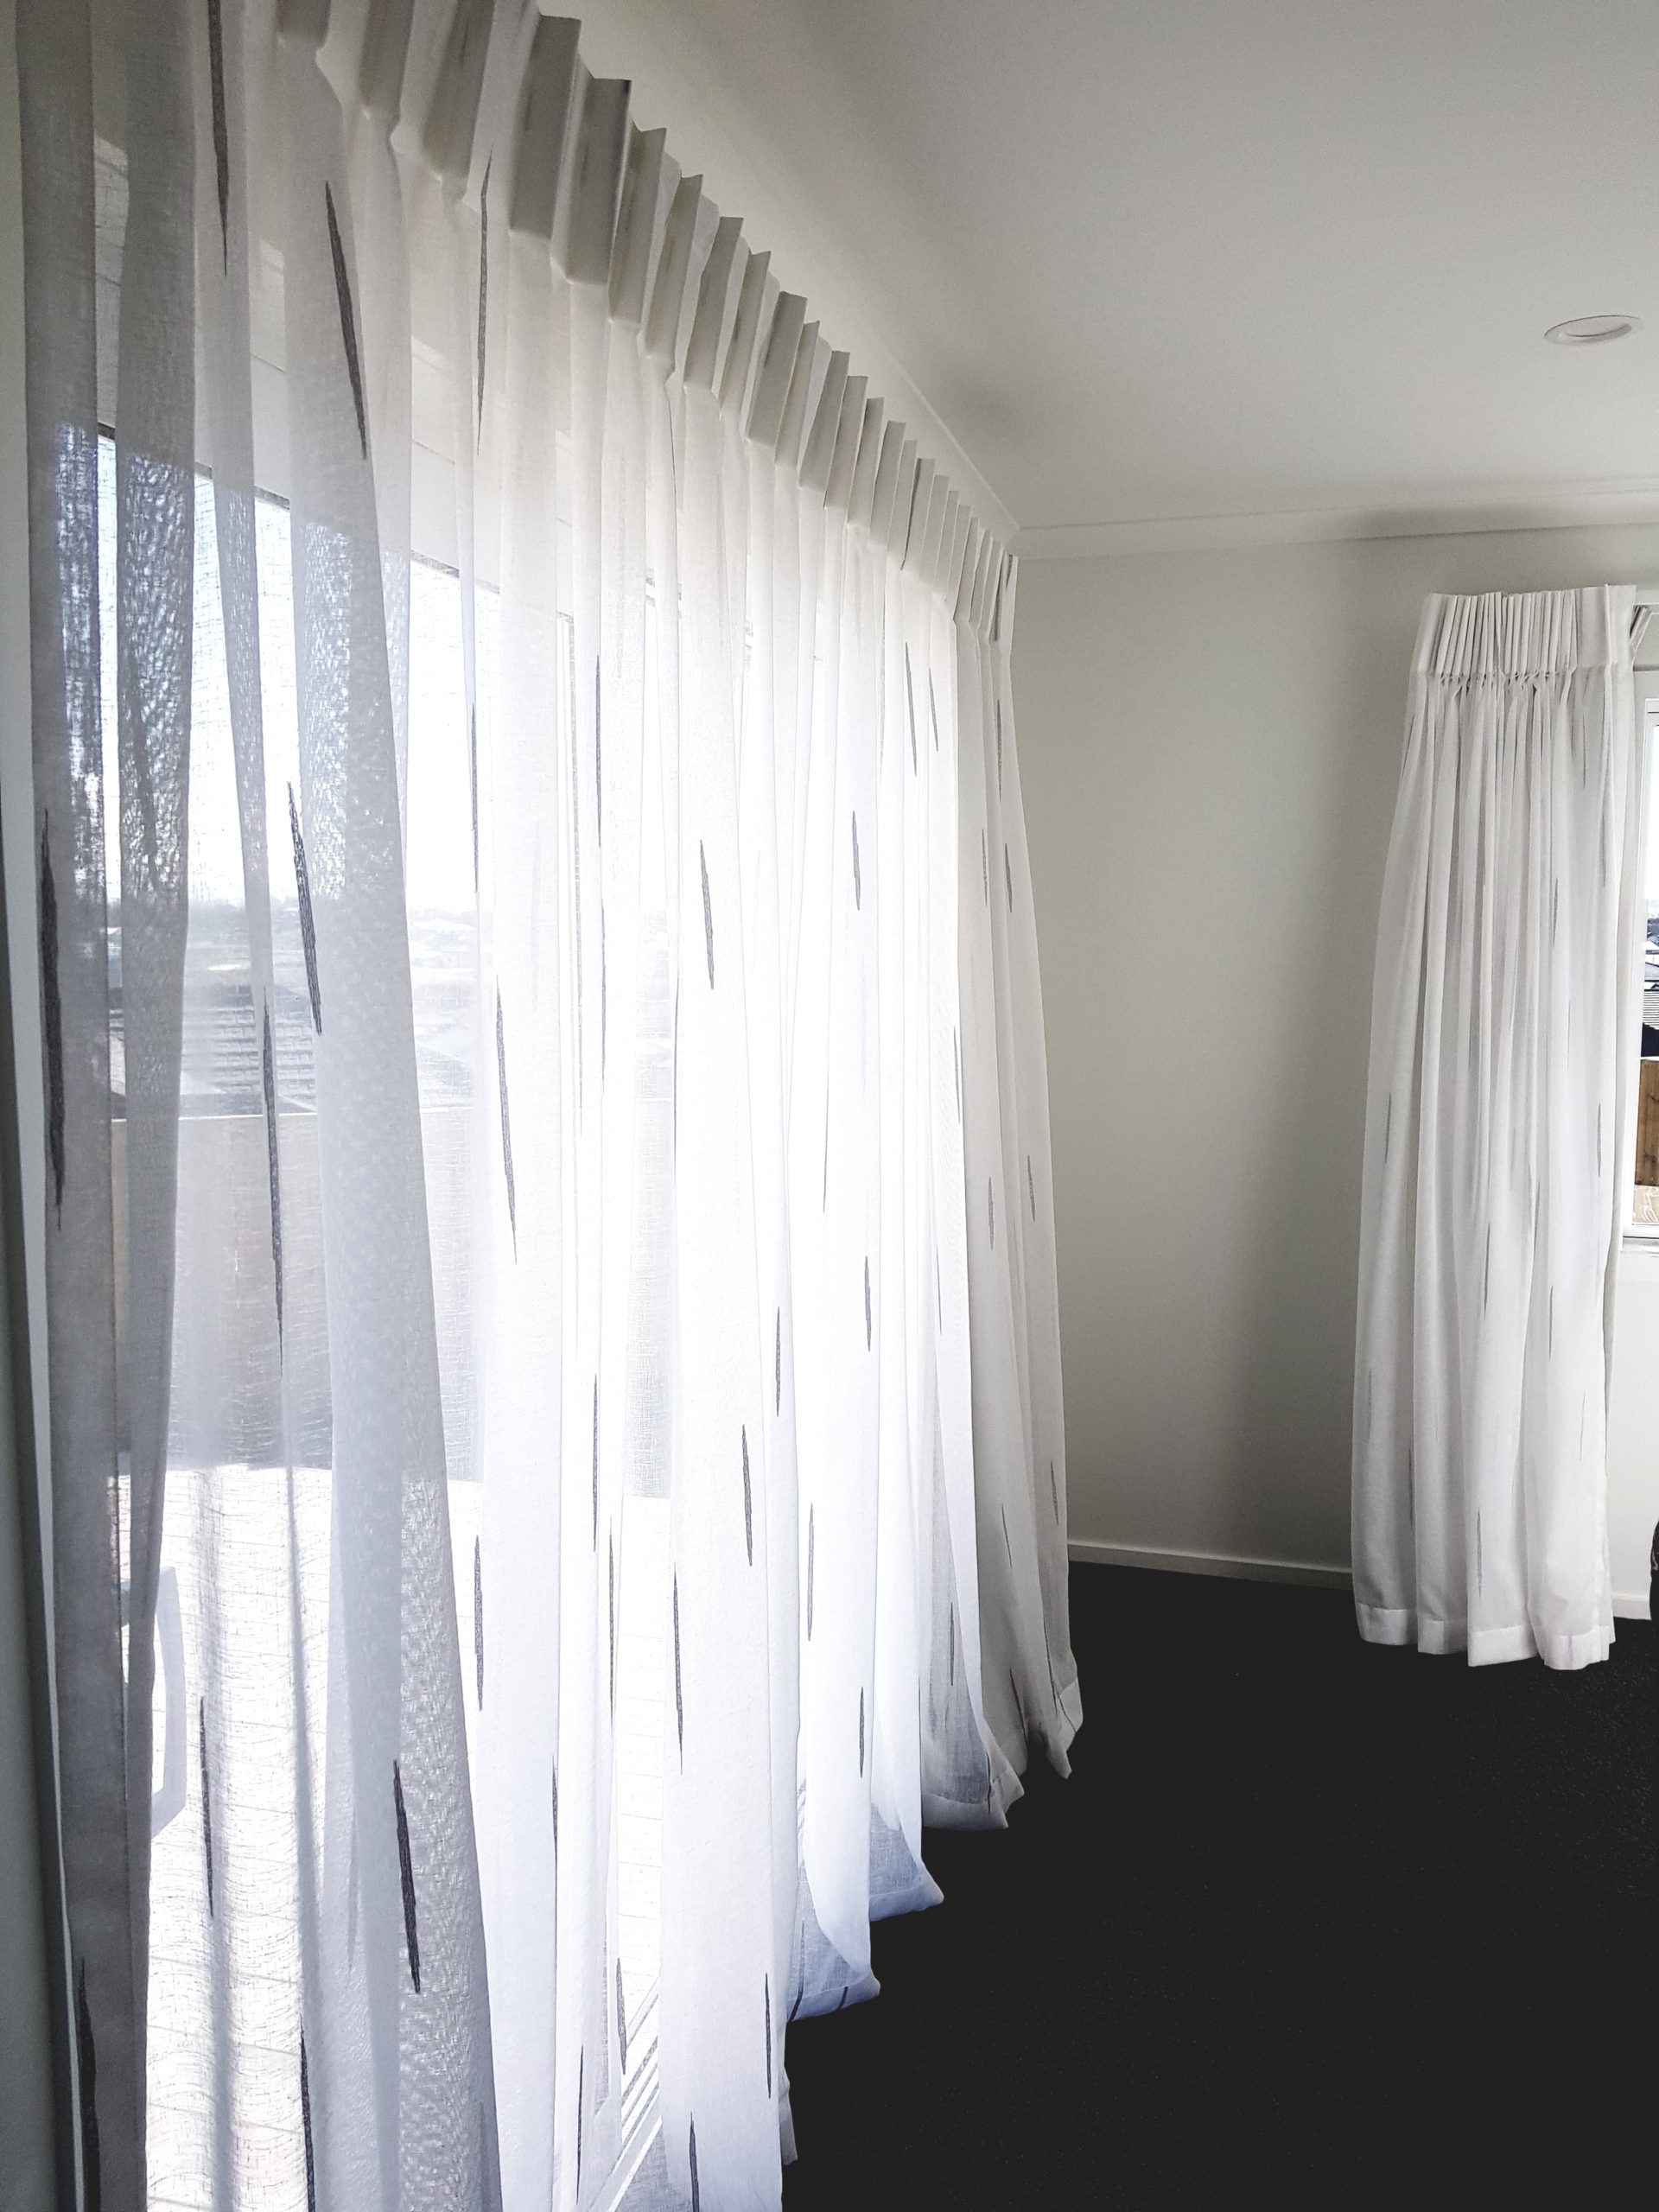 Sheer drapes in new home